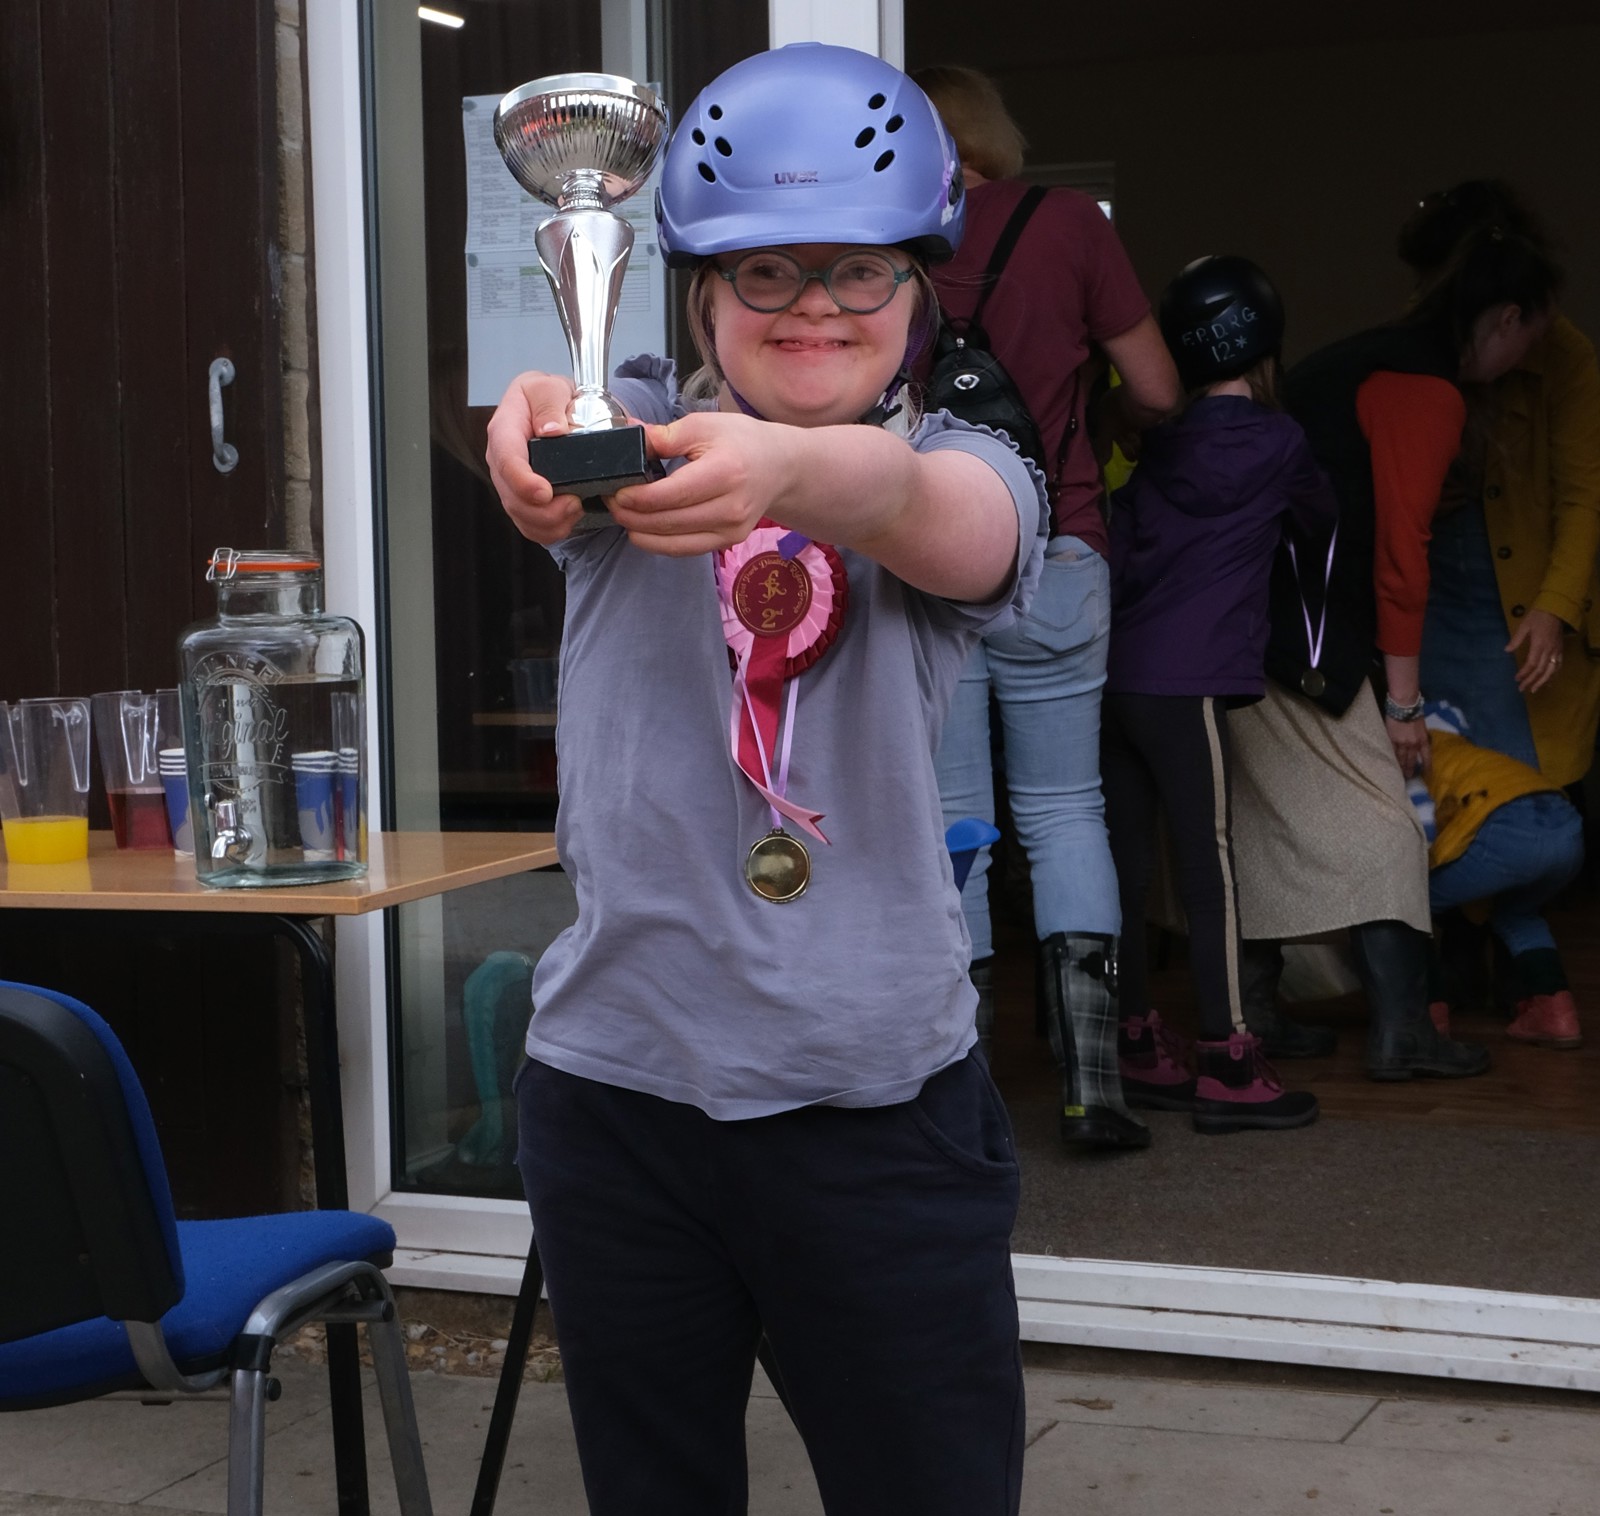 A girl who rides at Follifoot holding a trophy